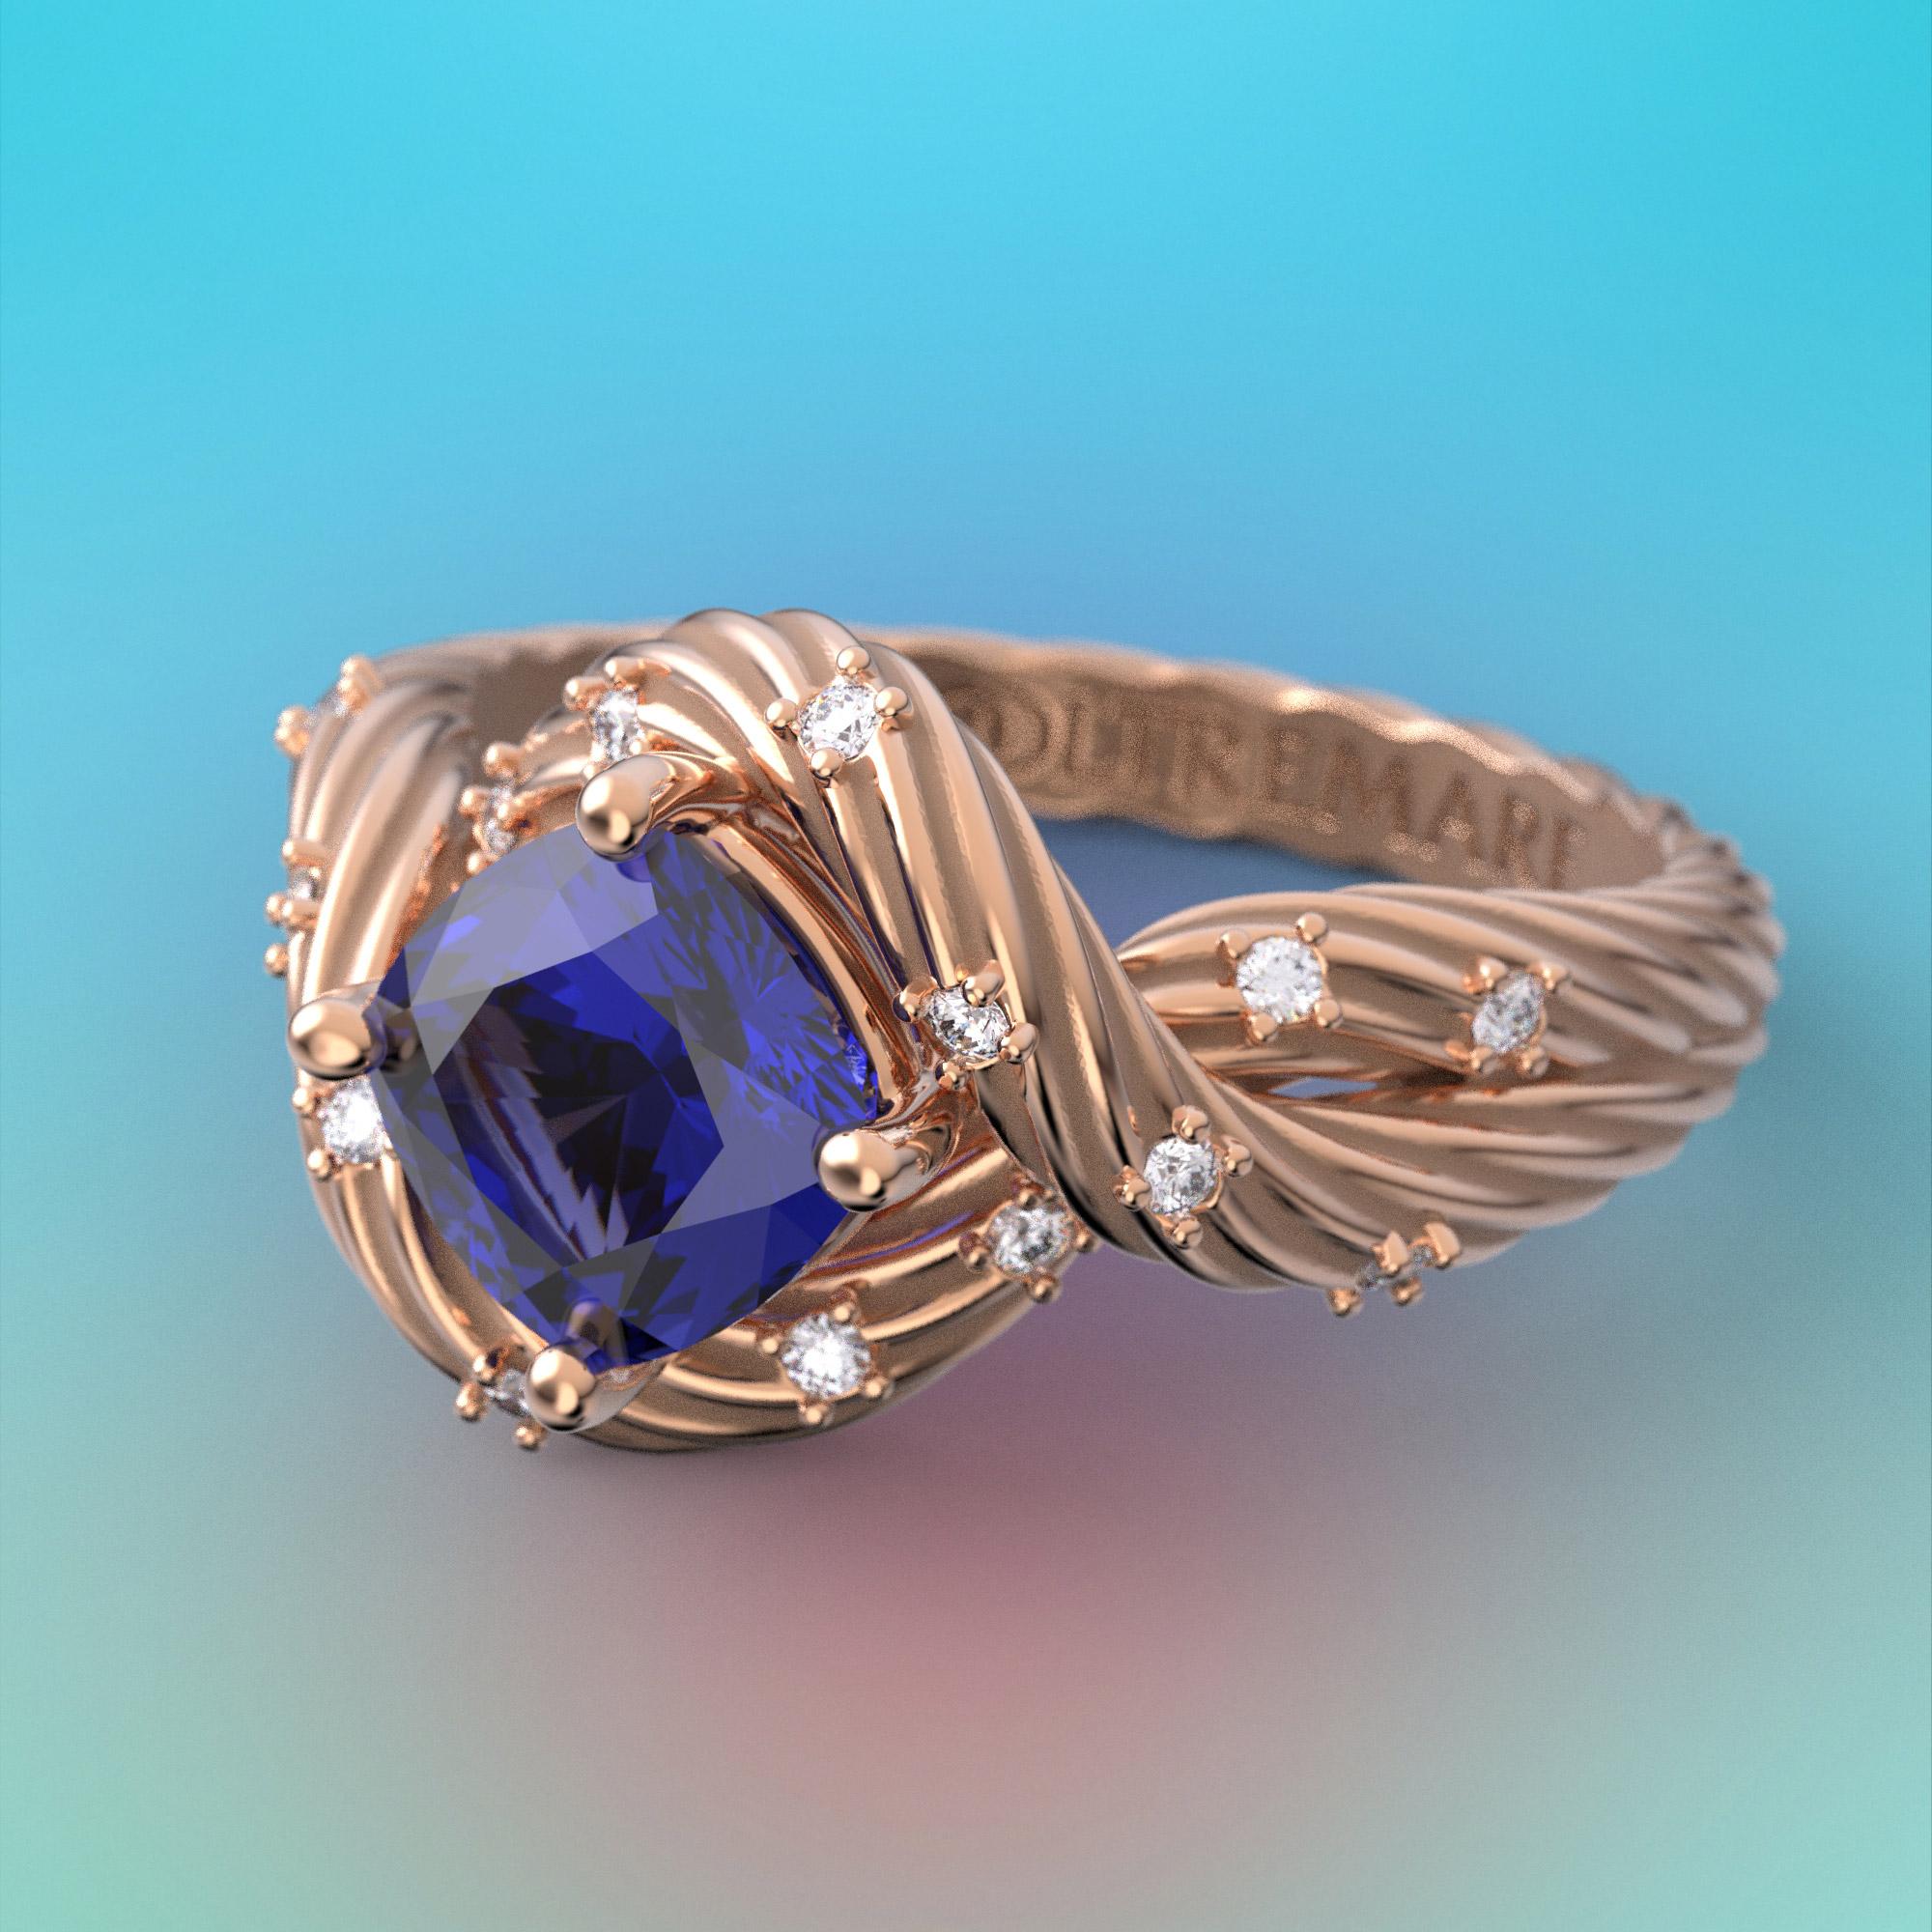 For Sale:  Tanzanite and Diamonds Ring 14k Solid Gold, Italian Fine Jewelry, made to order. 15